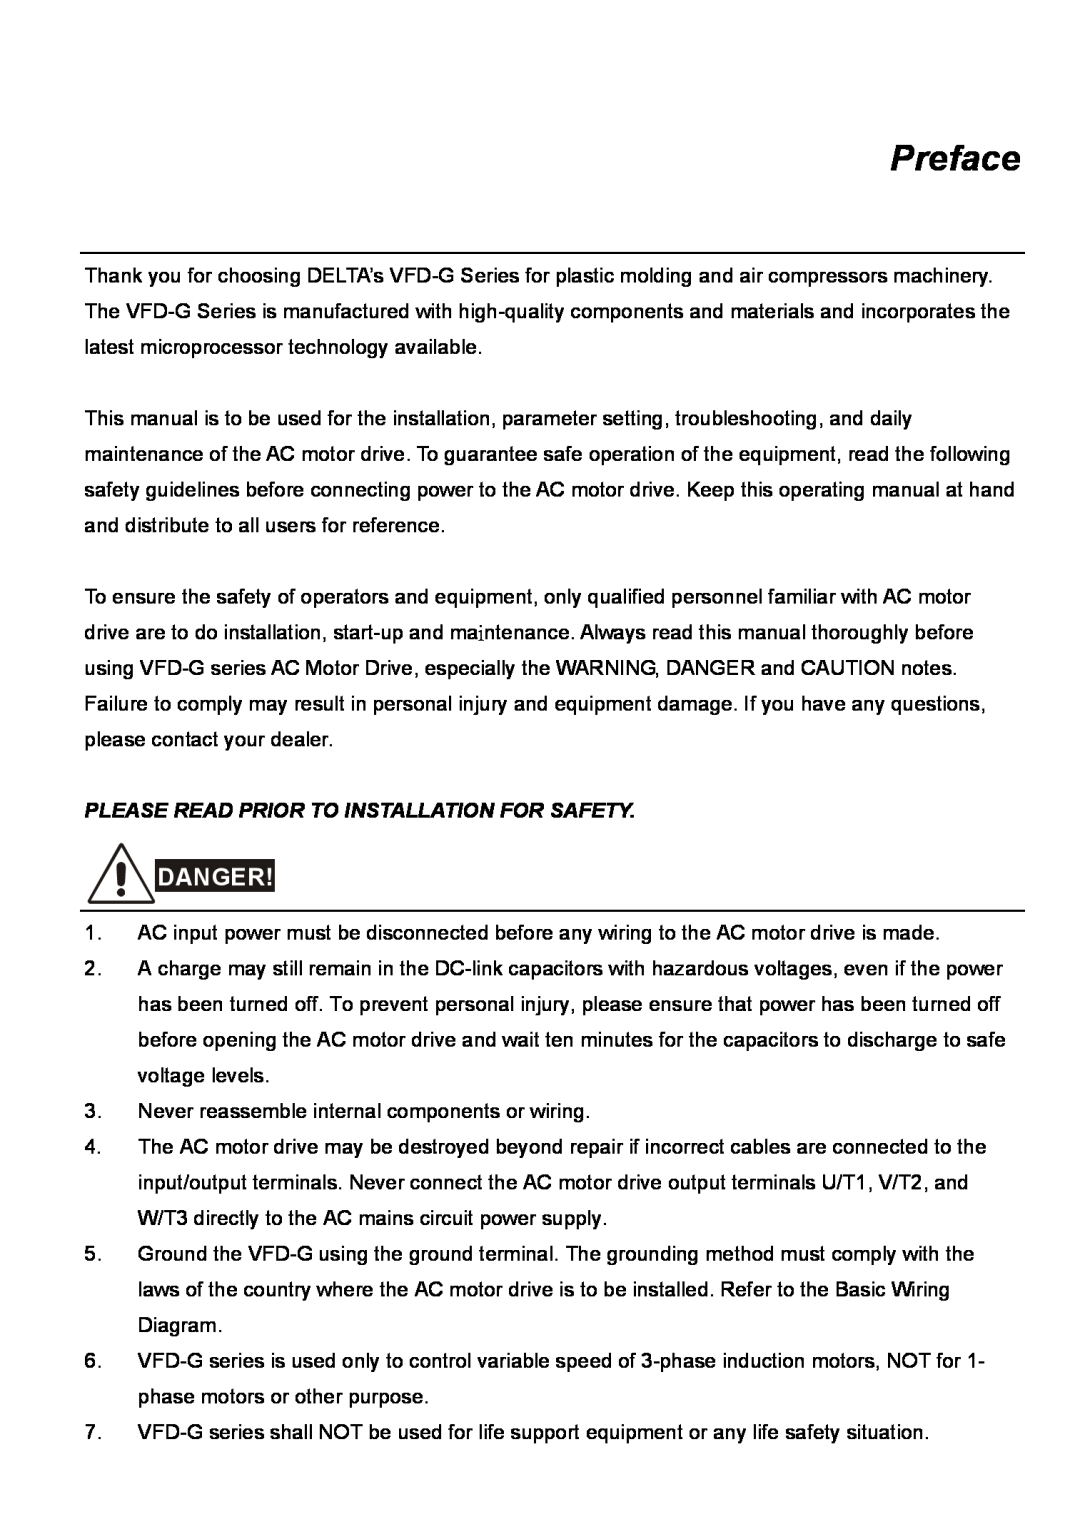 Delta Electronics VFD-G manual Preface, Danger, Please Read Prior To Installation For Safety 